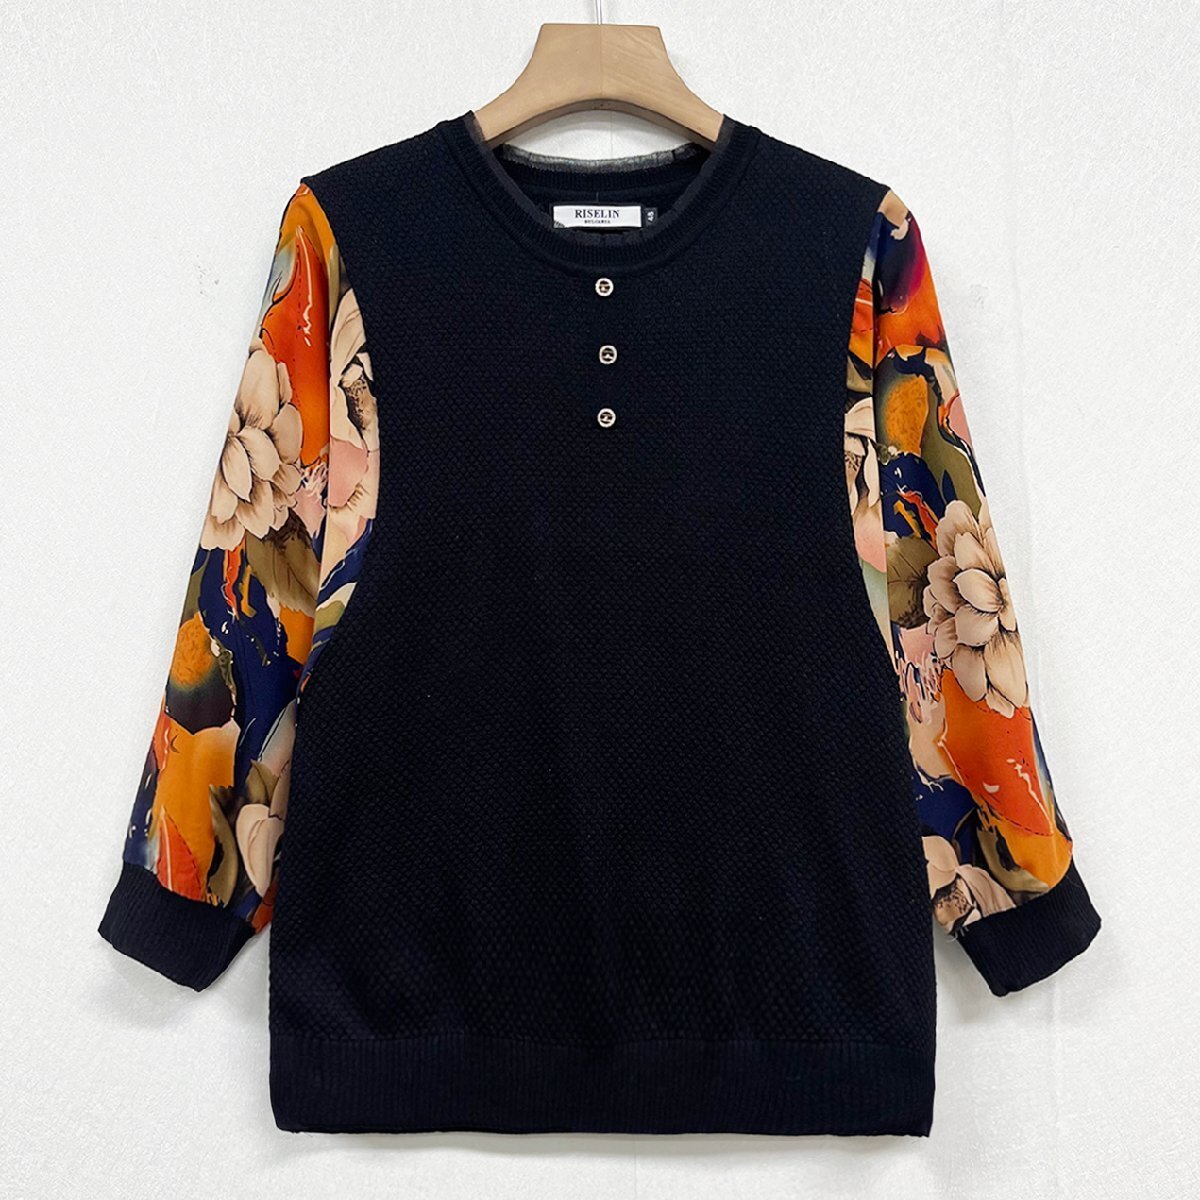  new work Europe made * regular price 4 ten thousand * BVLGARY a departure *RISELIN sweatshirt ventilation easy race switch floral print tops knitted lady's spring summer XL